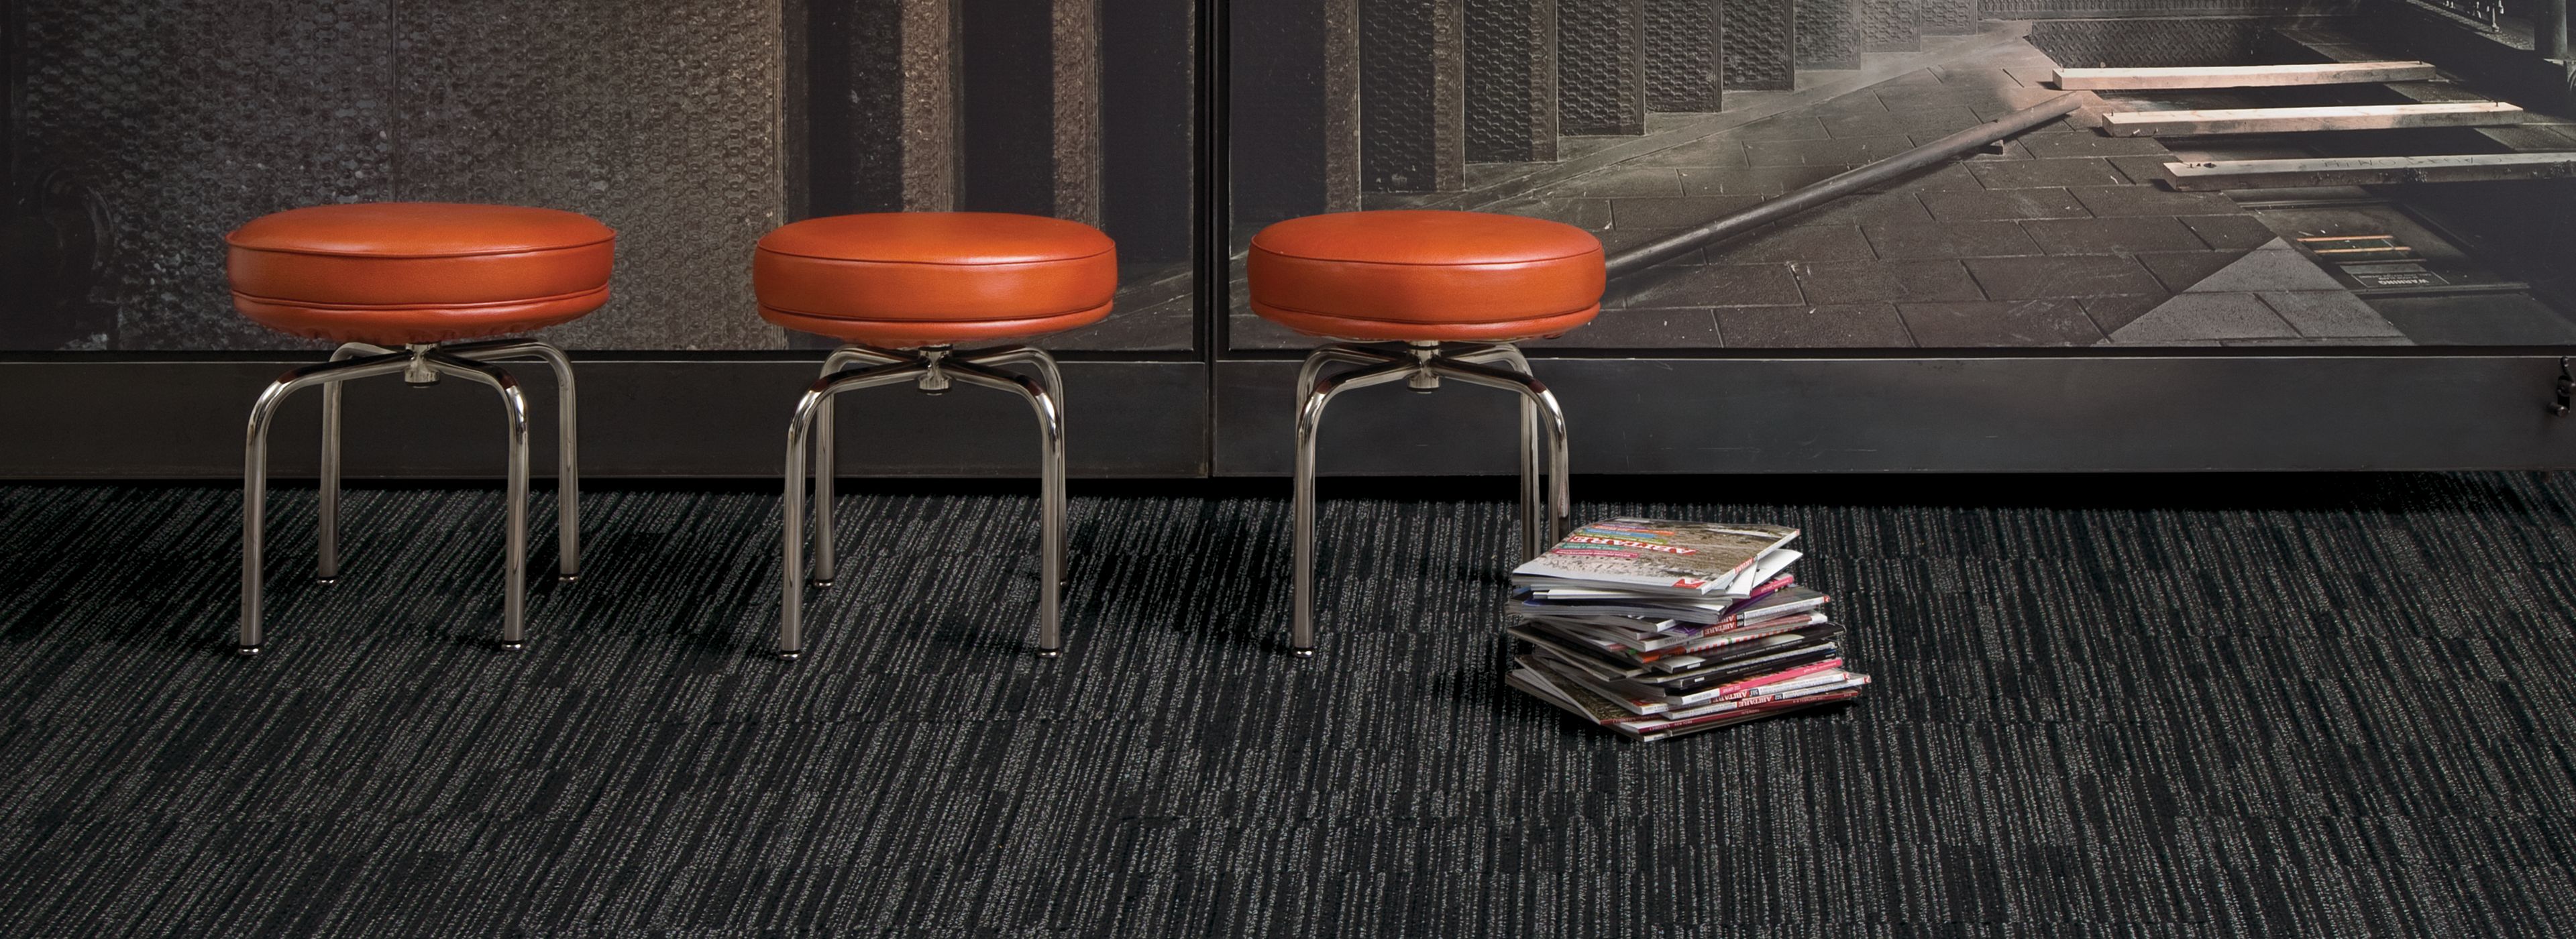 Interface CT102 carpet tile in open area with three red stools and stack of books numéro d’image 1